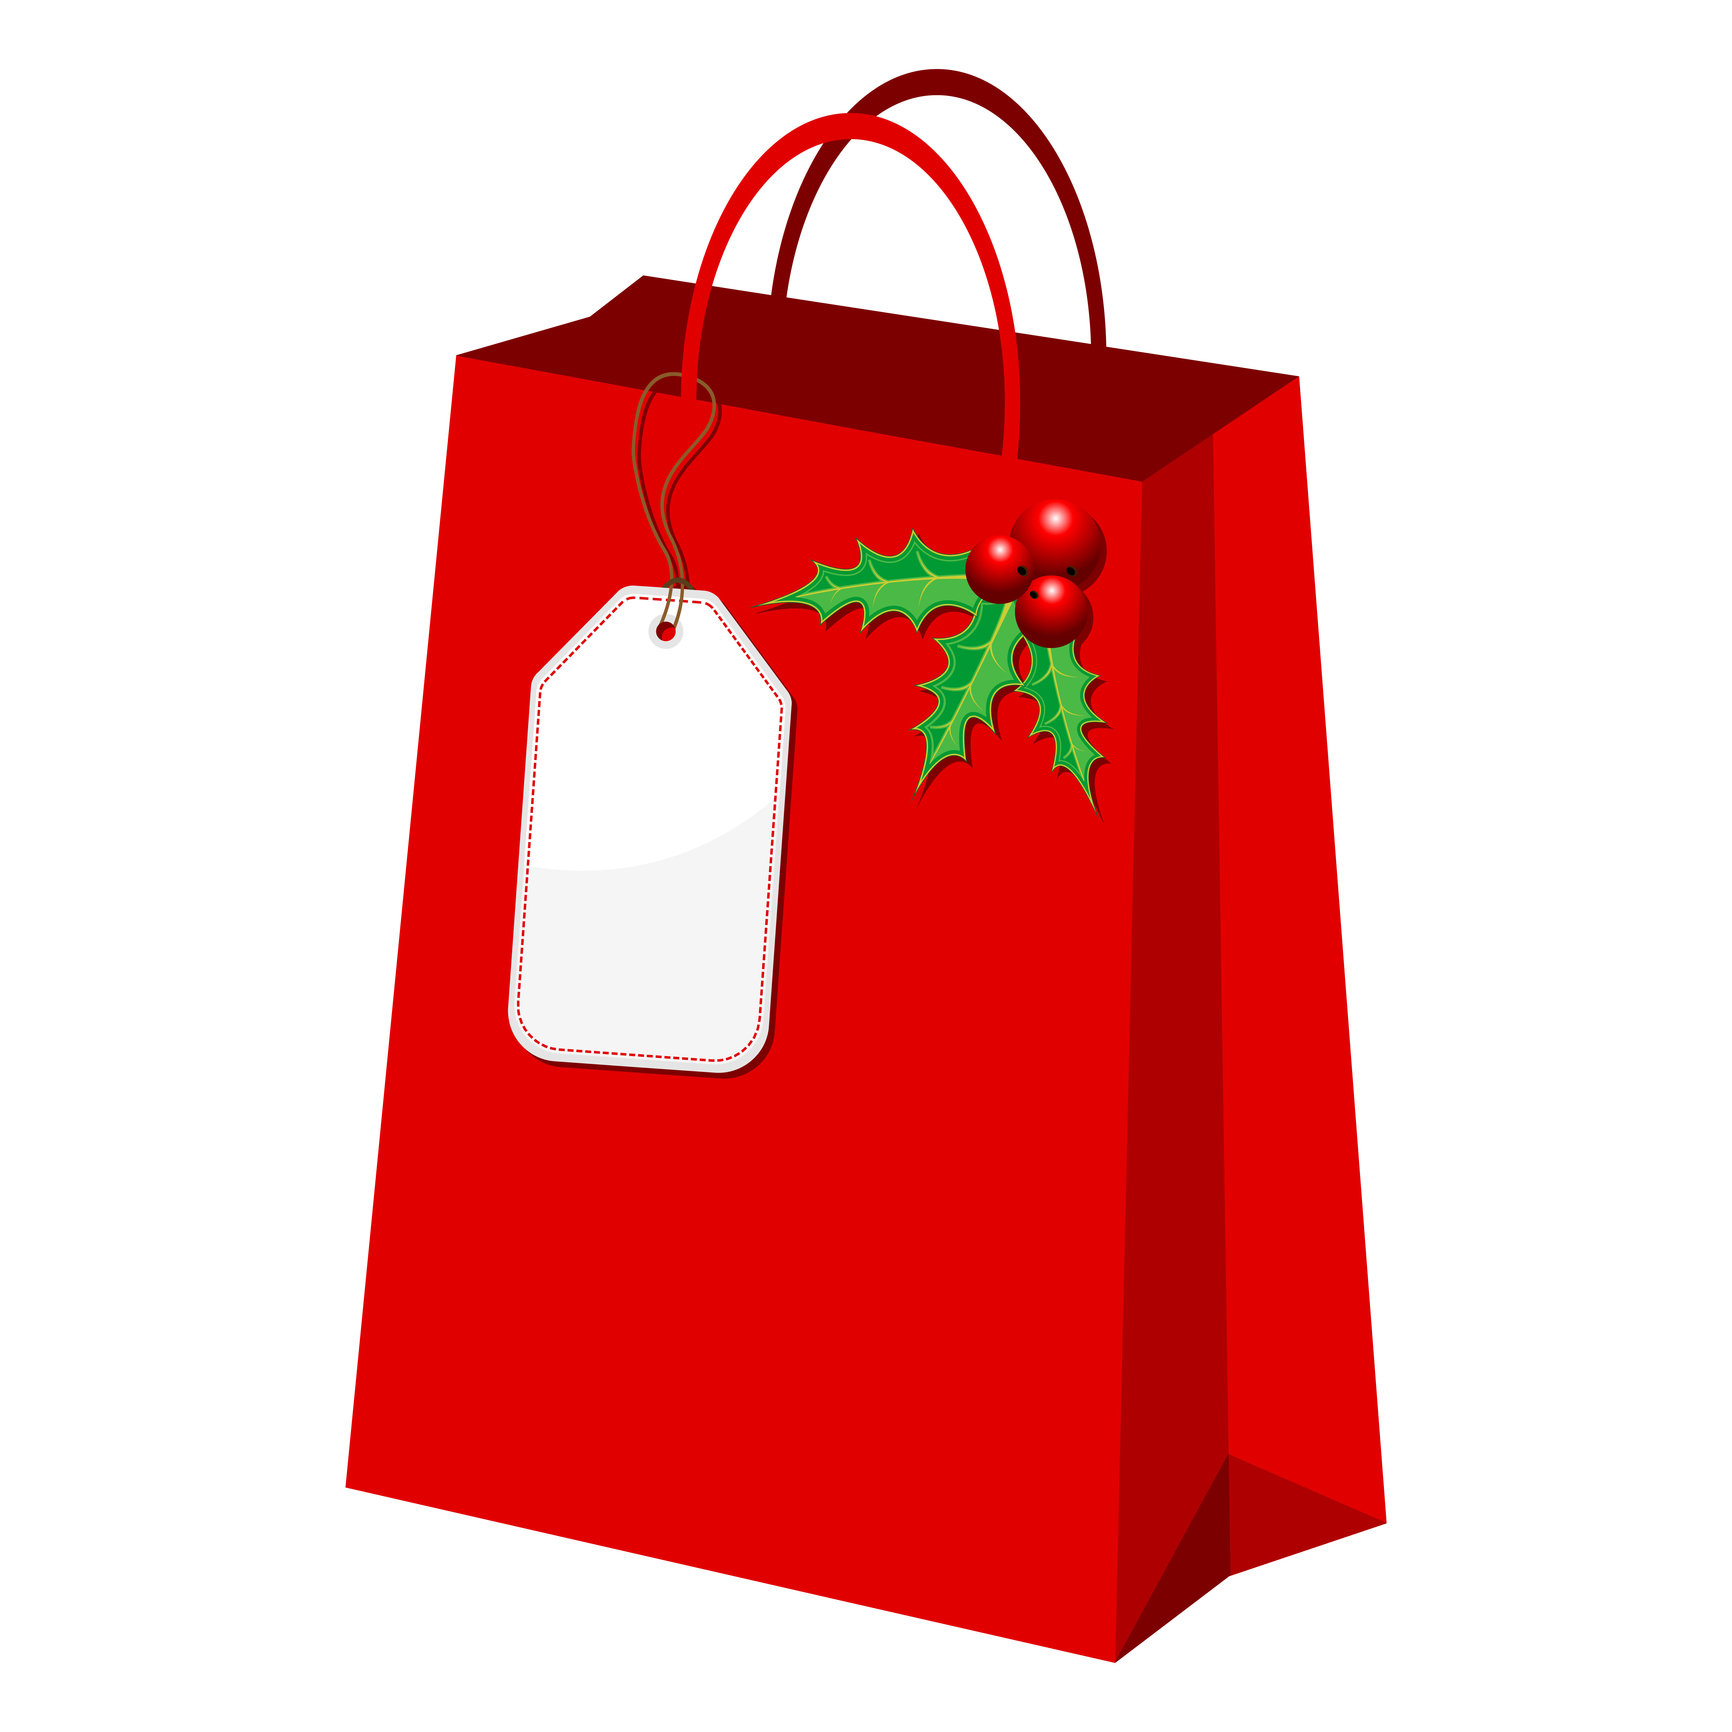 Christmas gift bags clipart